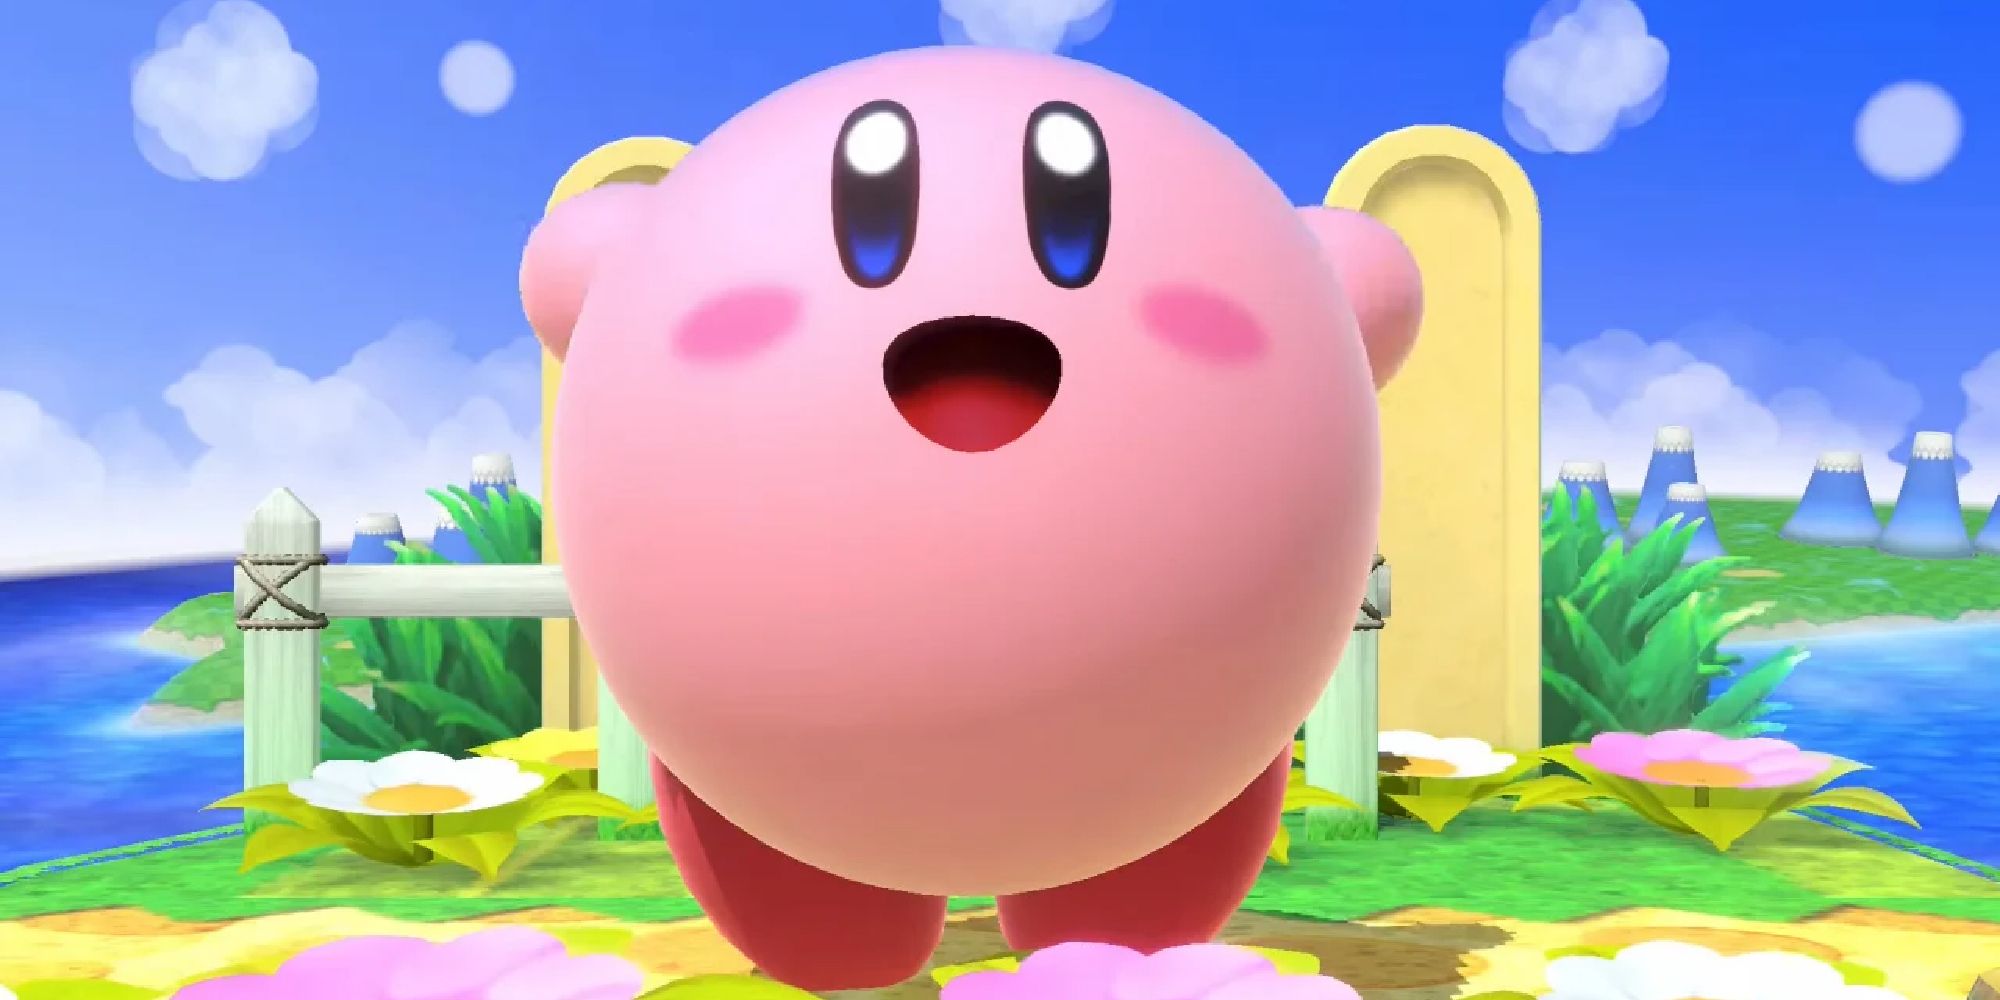 Kirby waving hi to the camera on Green Greens in Super Smash Bros Ultimate